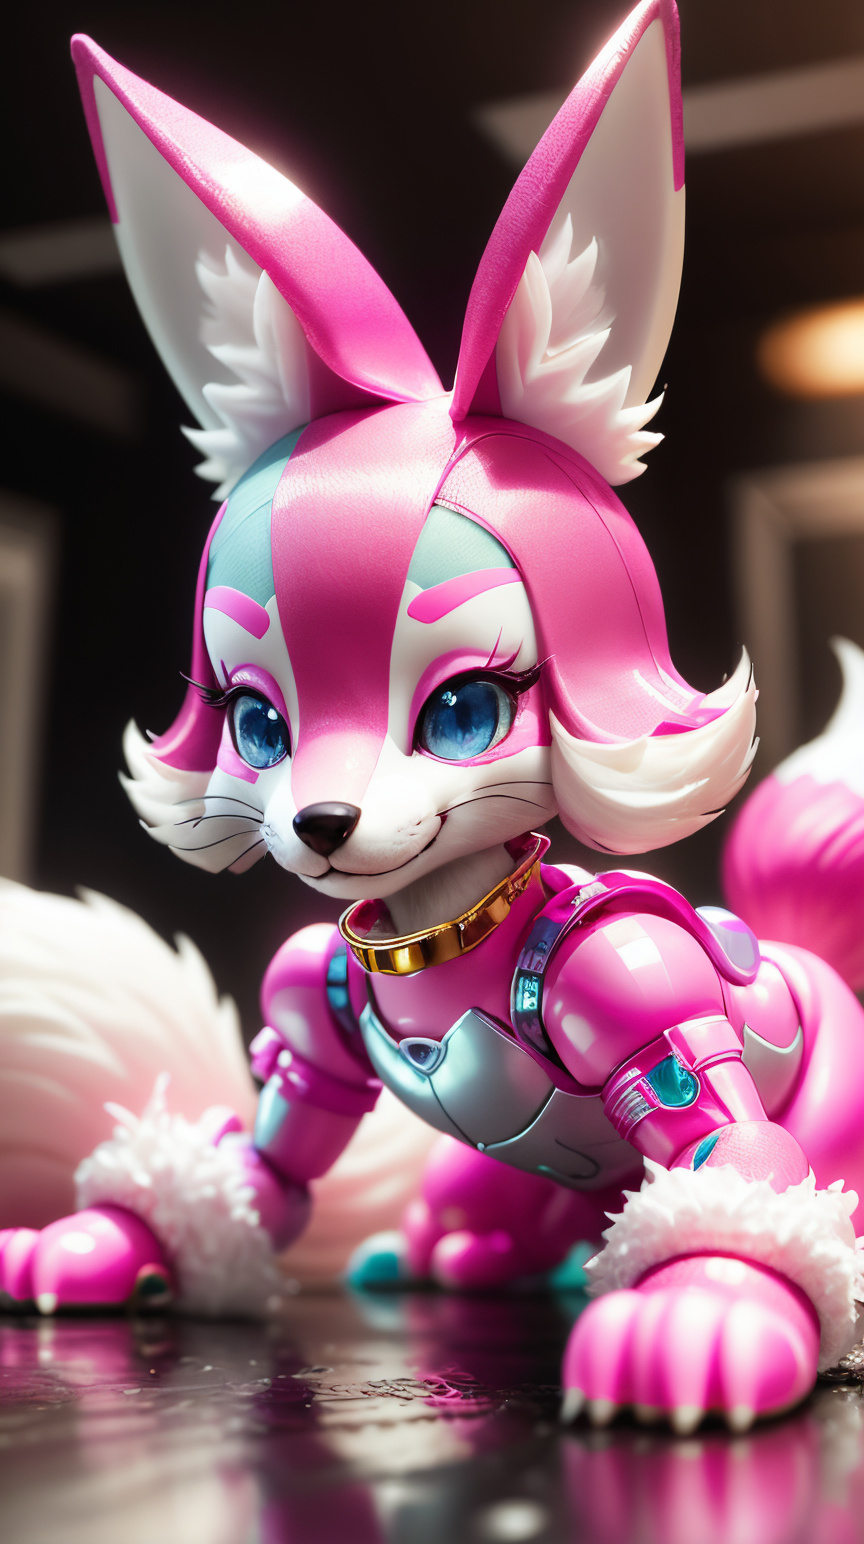 <lora:BarbieCore:0.8> BarbieCore cunning sly fox, (shiny plastic:0.8), (pink and white:0.9), (pastel:0.85)